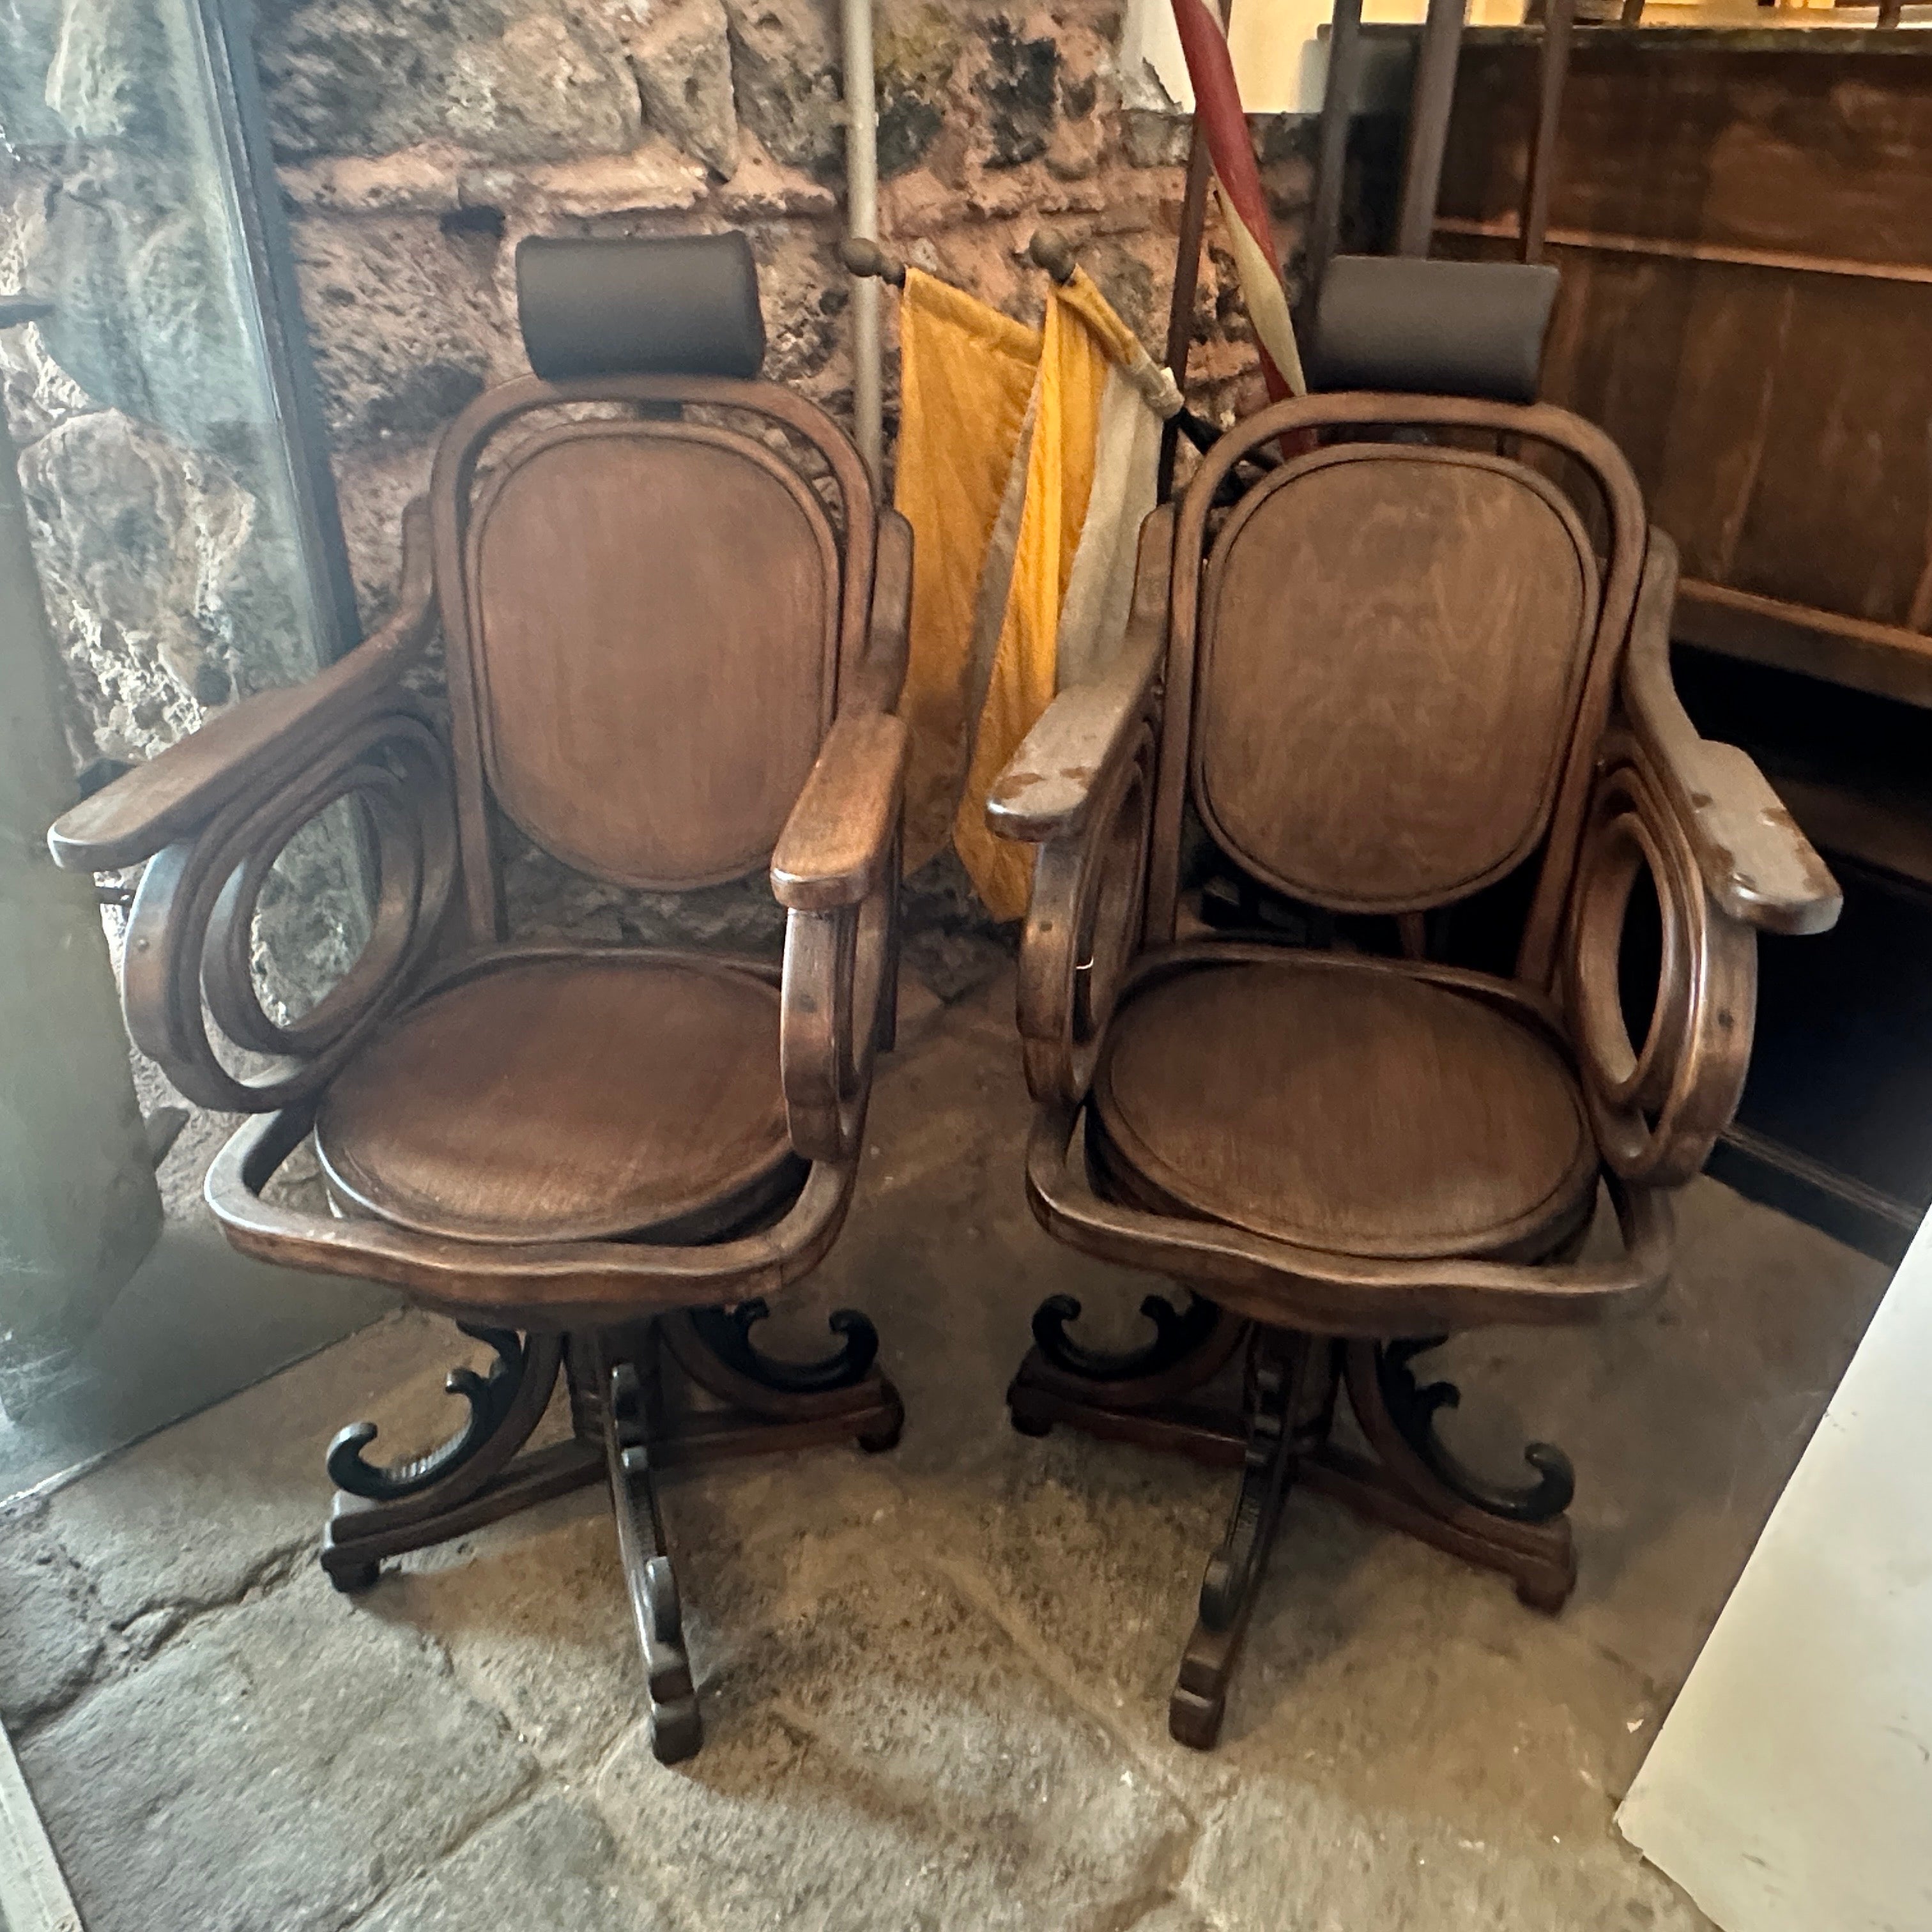 Two swivel chairs used on a Barber Shop in early 20th century, they have been restored, wood part are in good conditions, also headrests have been restored and upholstered in a brown sky leather, they are an exquisite examples of Art Nouveau design